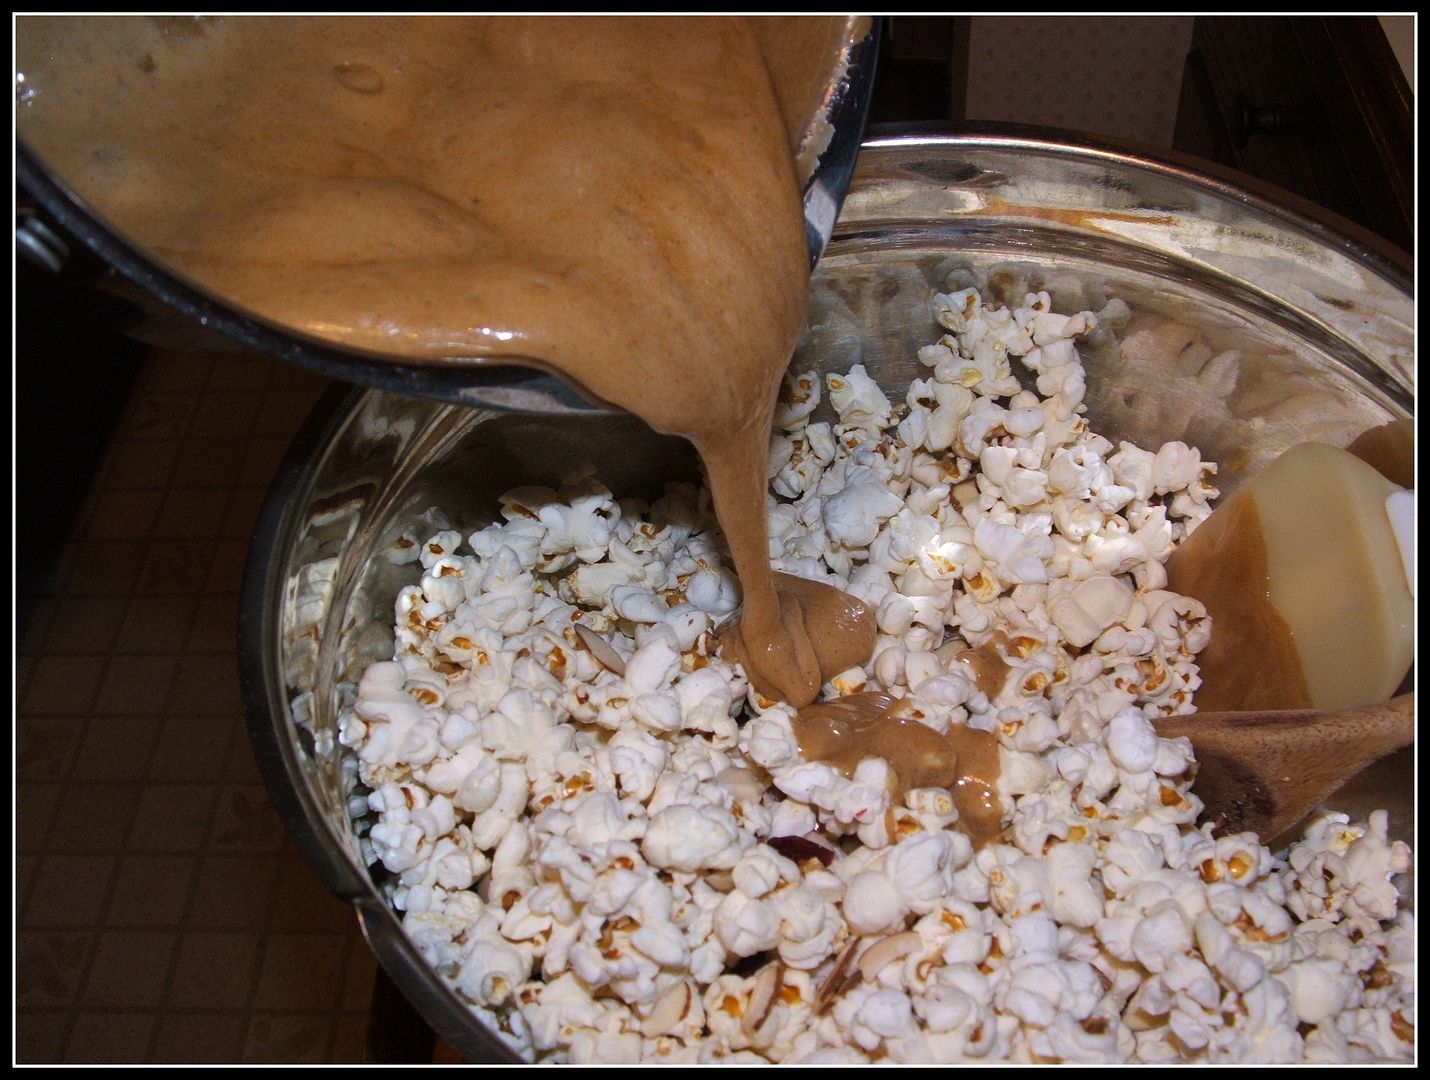 caramel popcorn by Angie Ouellette-Tower for godsgrowinggarden.com photo 005_zpsea08c071.jpg